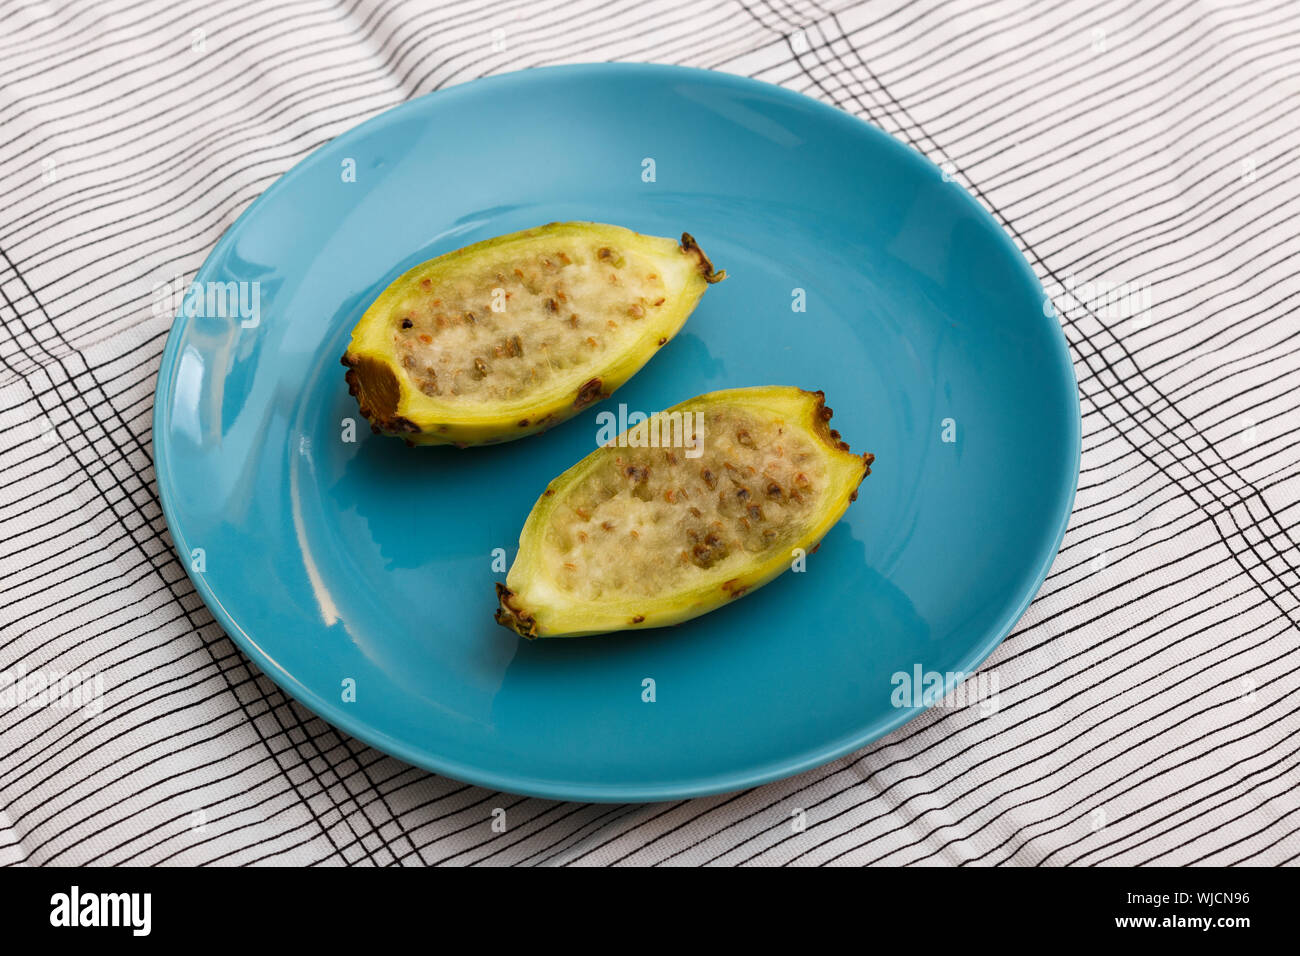 View of two halves of a yellow indian fig (also called prickly pear) on a blue plate. Stock Photo